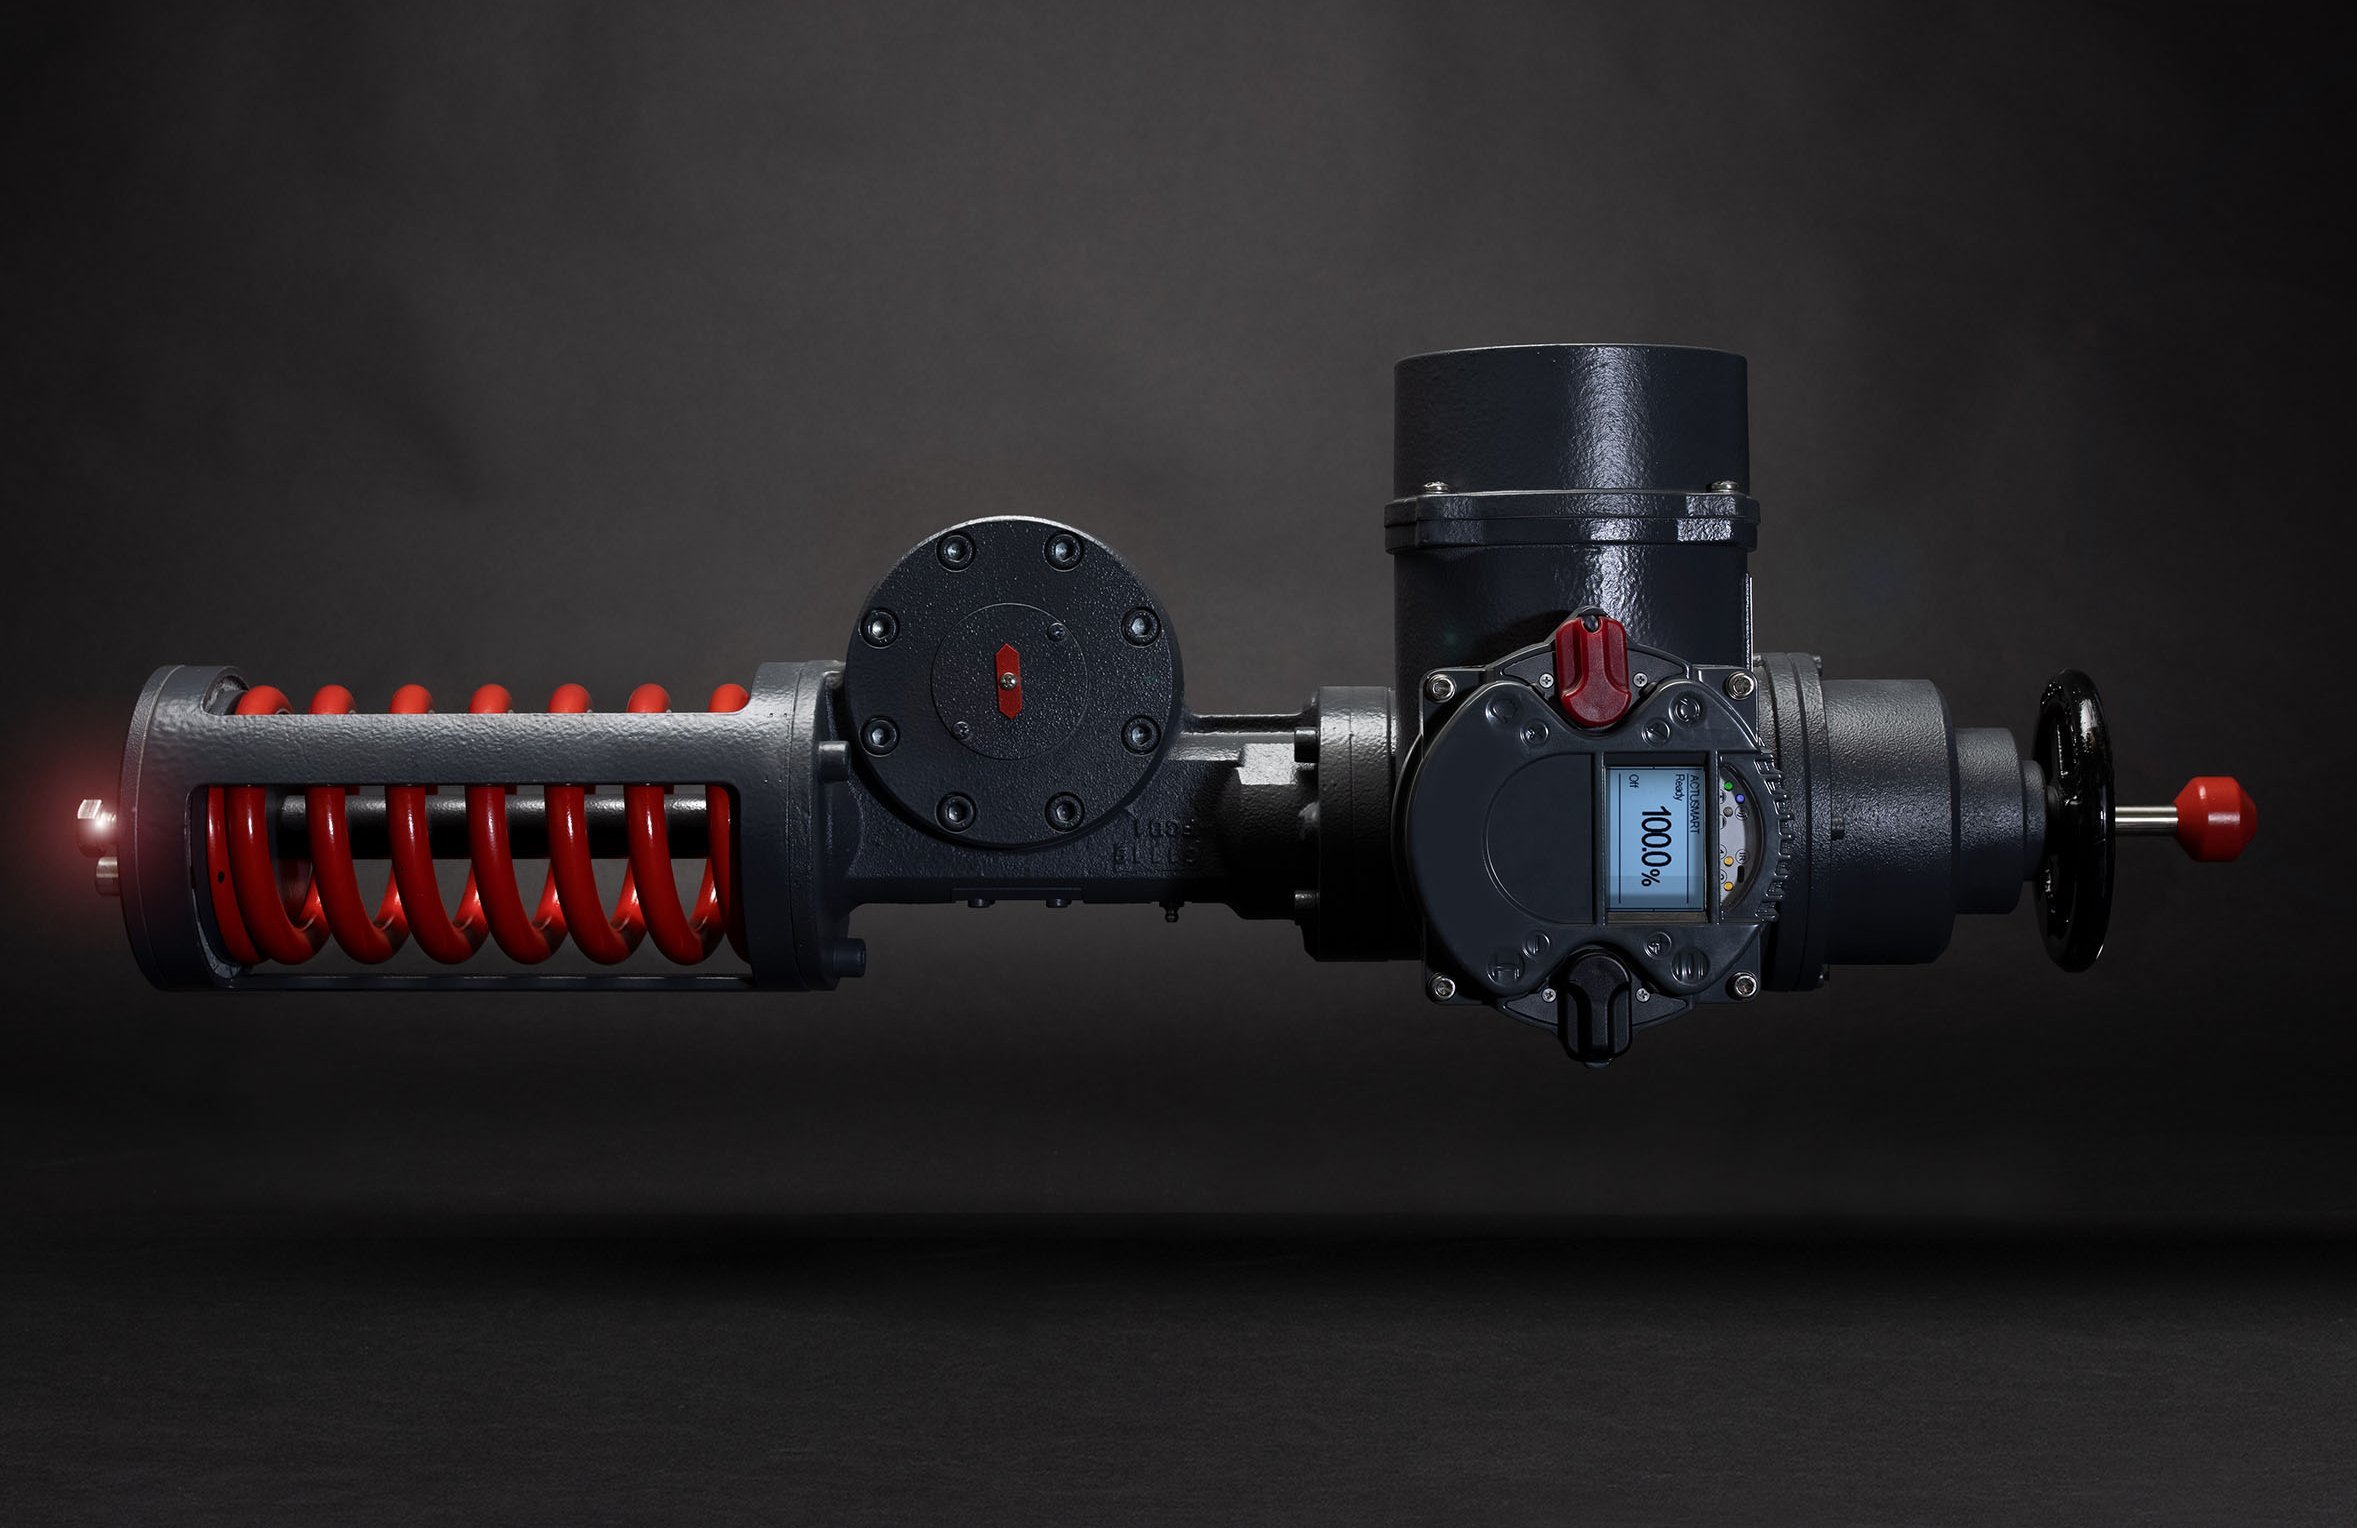 An industrial actuator by SCHIEBEL in a dark environment. On the left side of the device is a red spring. A display with "100 %" is mounted at the actuator.